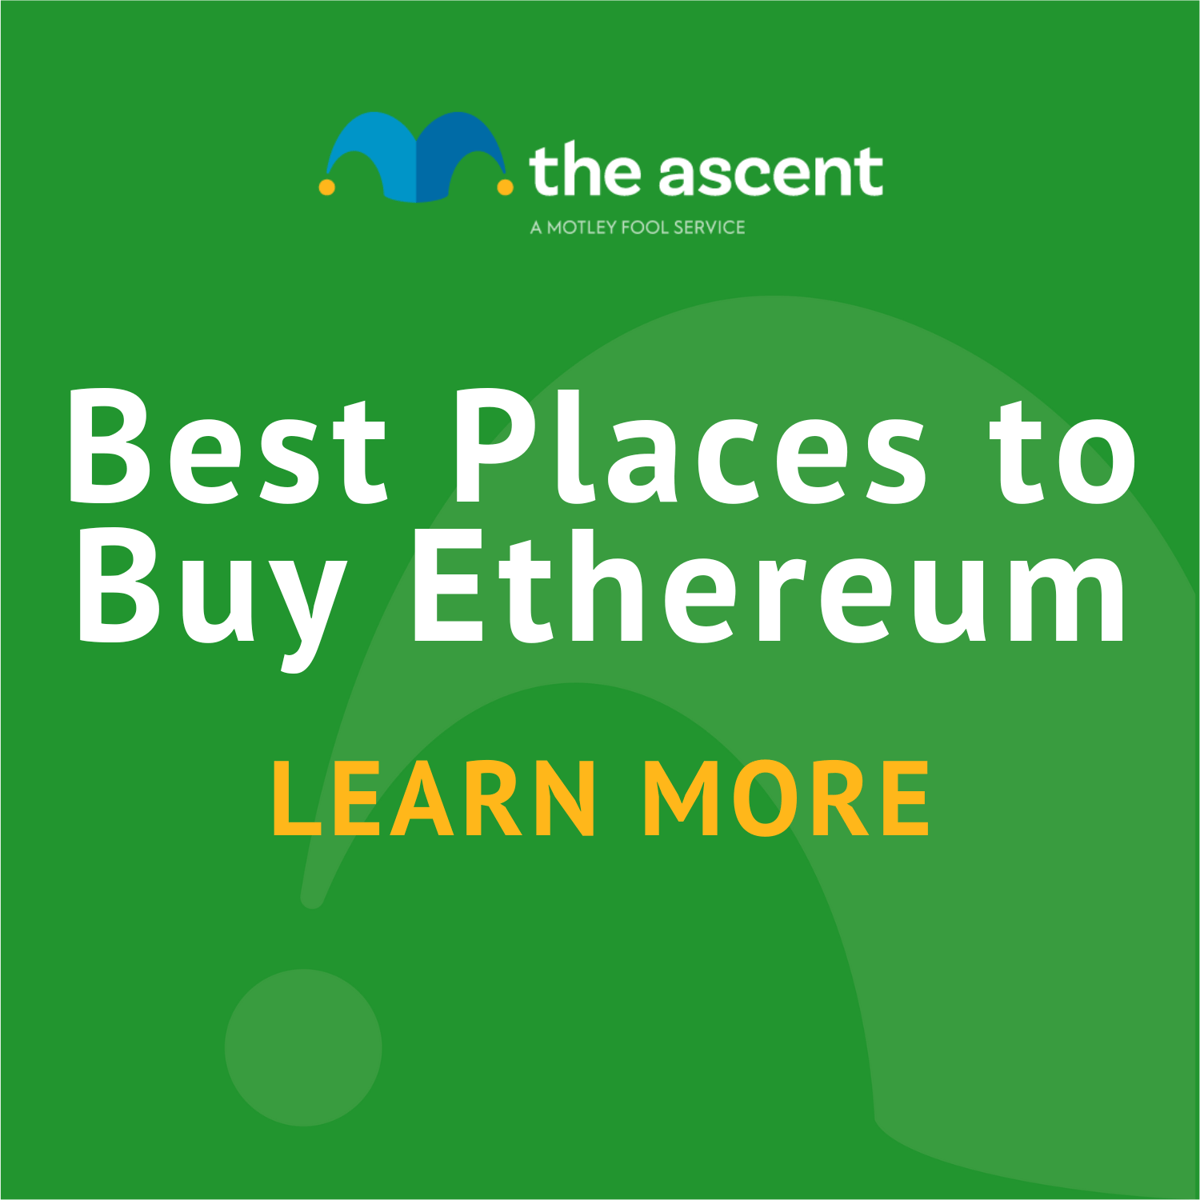 10 Best Places to Buy Ethereum in | CoinJournal